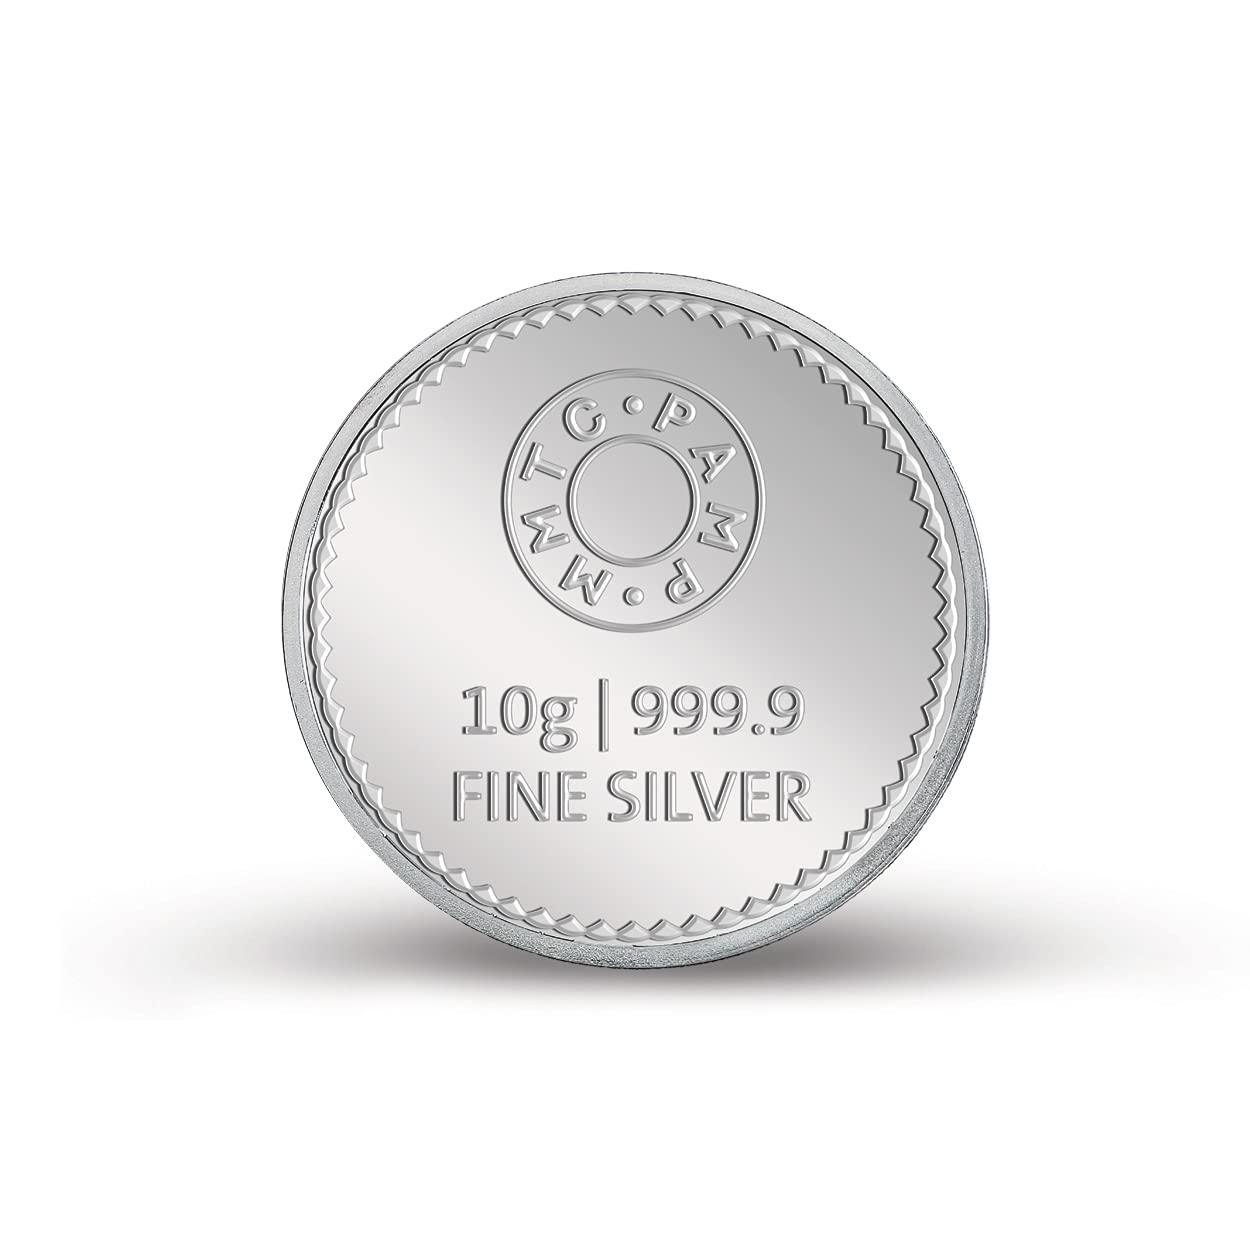 10 gm Silver 999.9 Minted Coin Best Wishes Colored Capsule